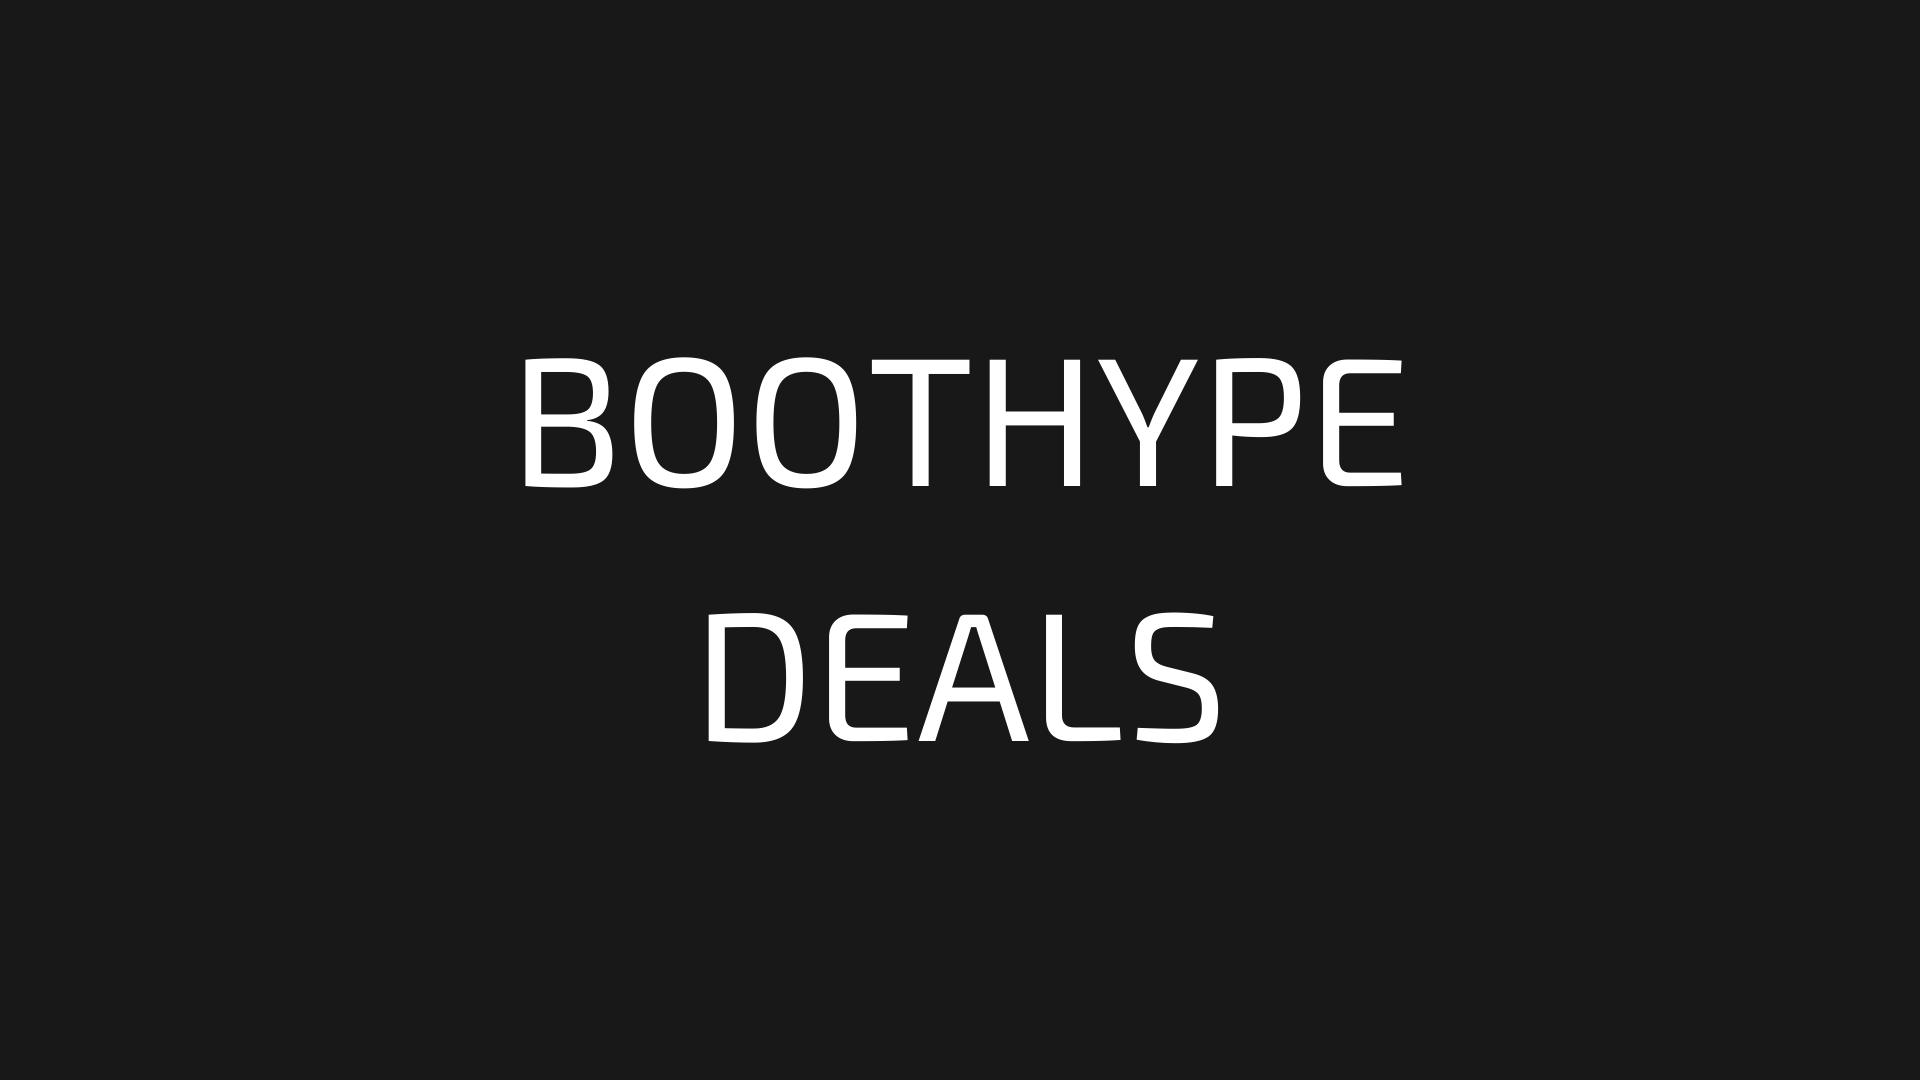 BOOTHYPE deals - best deals and discounts on the internet for cheap football boots, soccer cleats, football kits and performance gear.